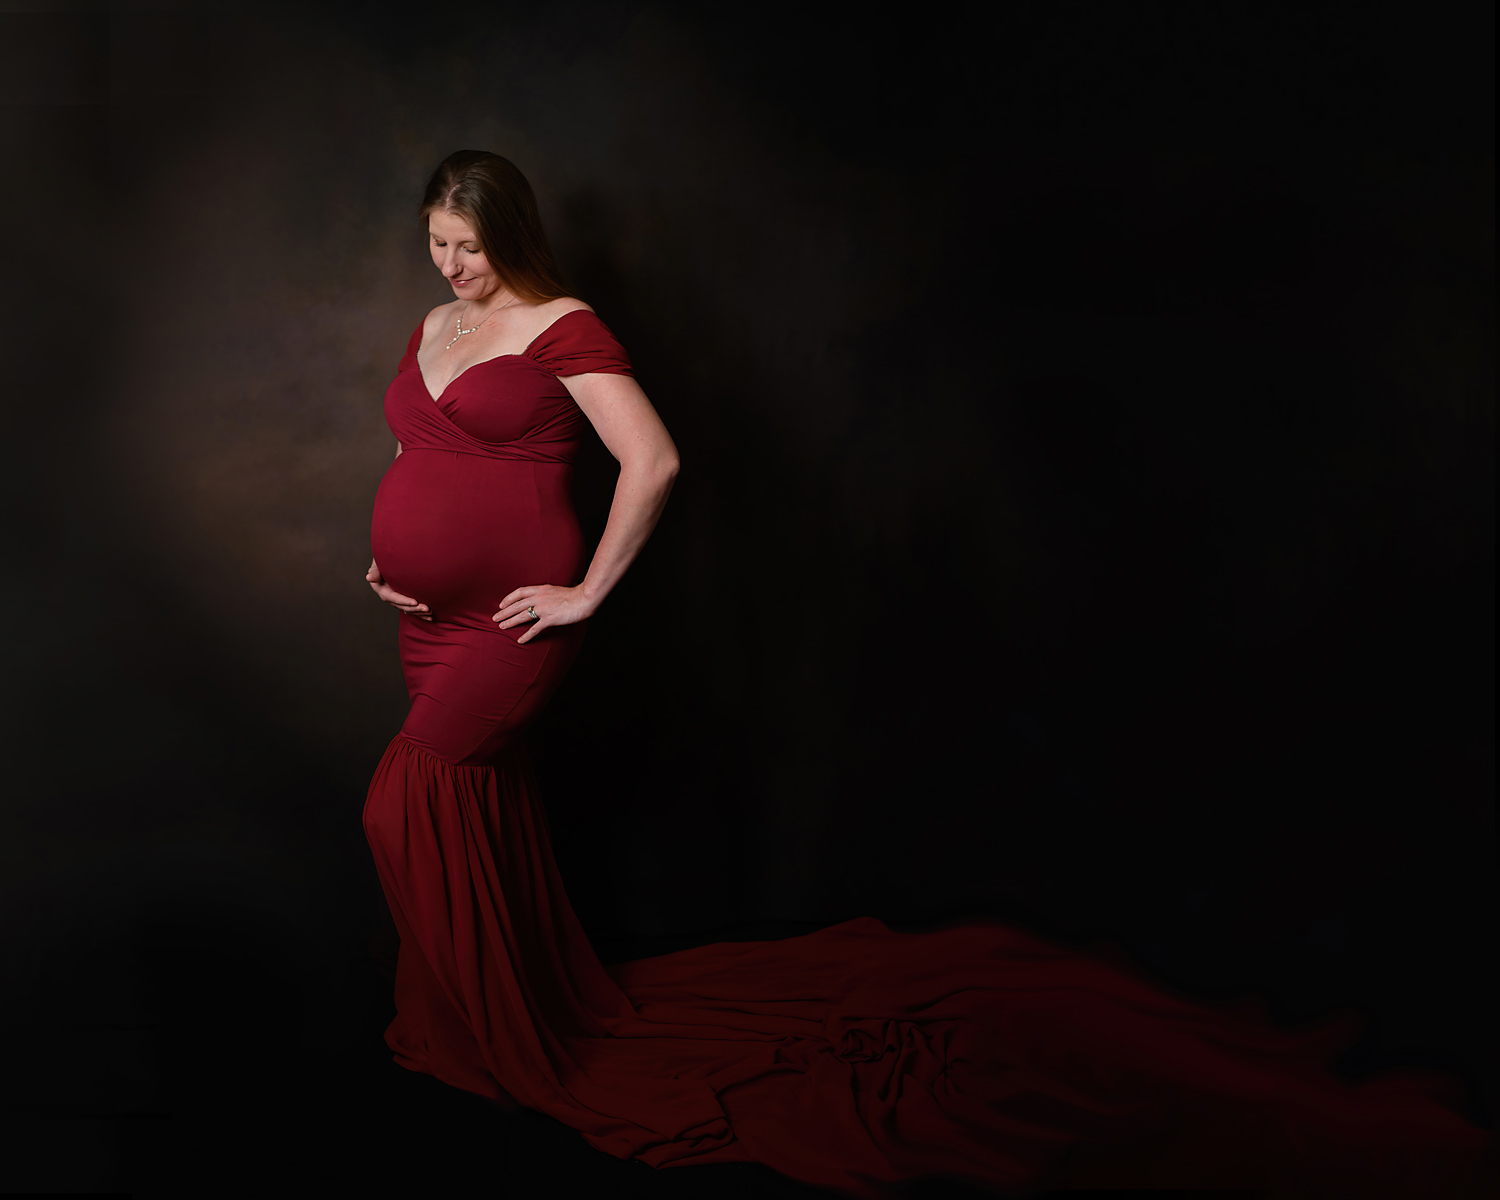 Maternity photo taken outside by Lisa Rowland Photography in Trenton, Florida